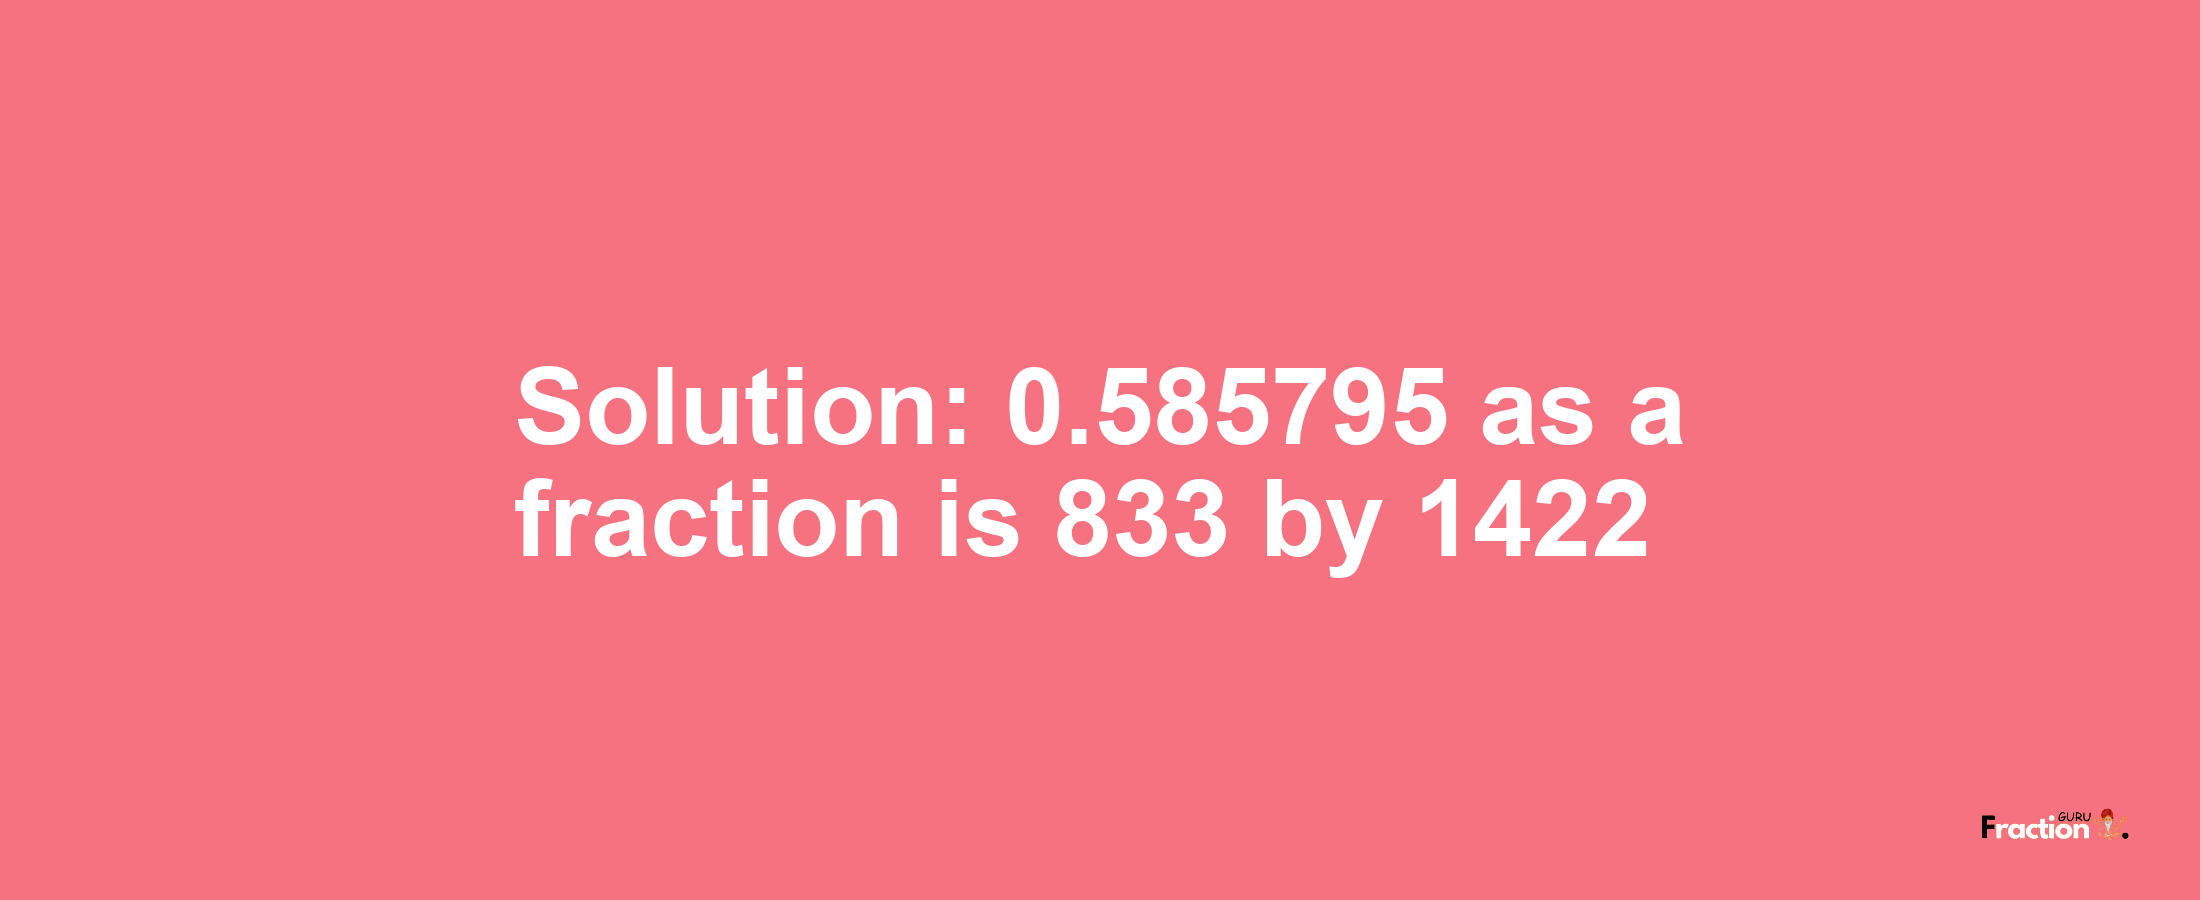 Solution:0.585795 as a fraction is 833/1422